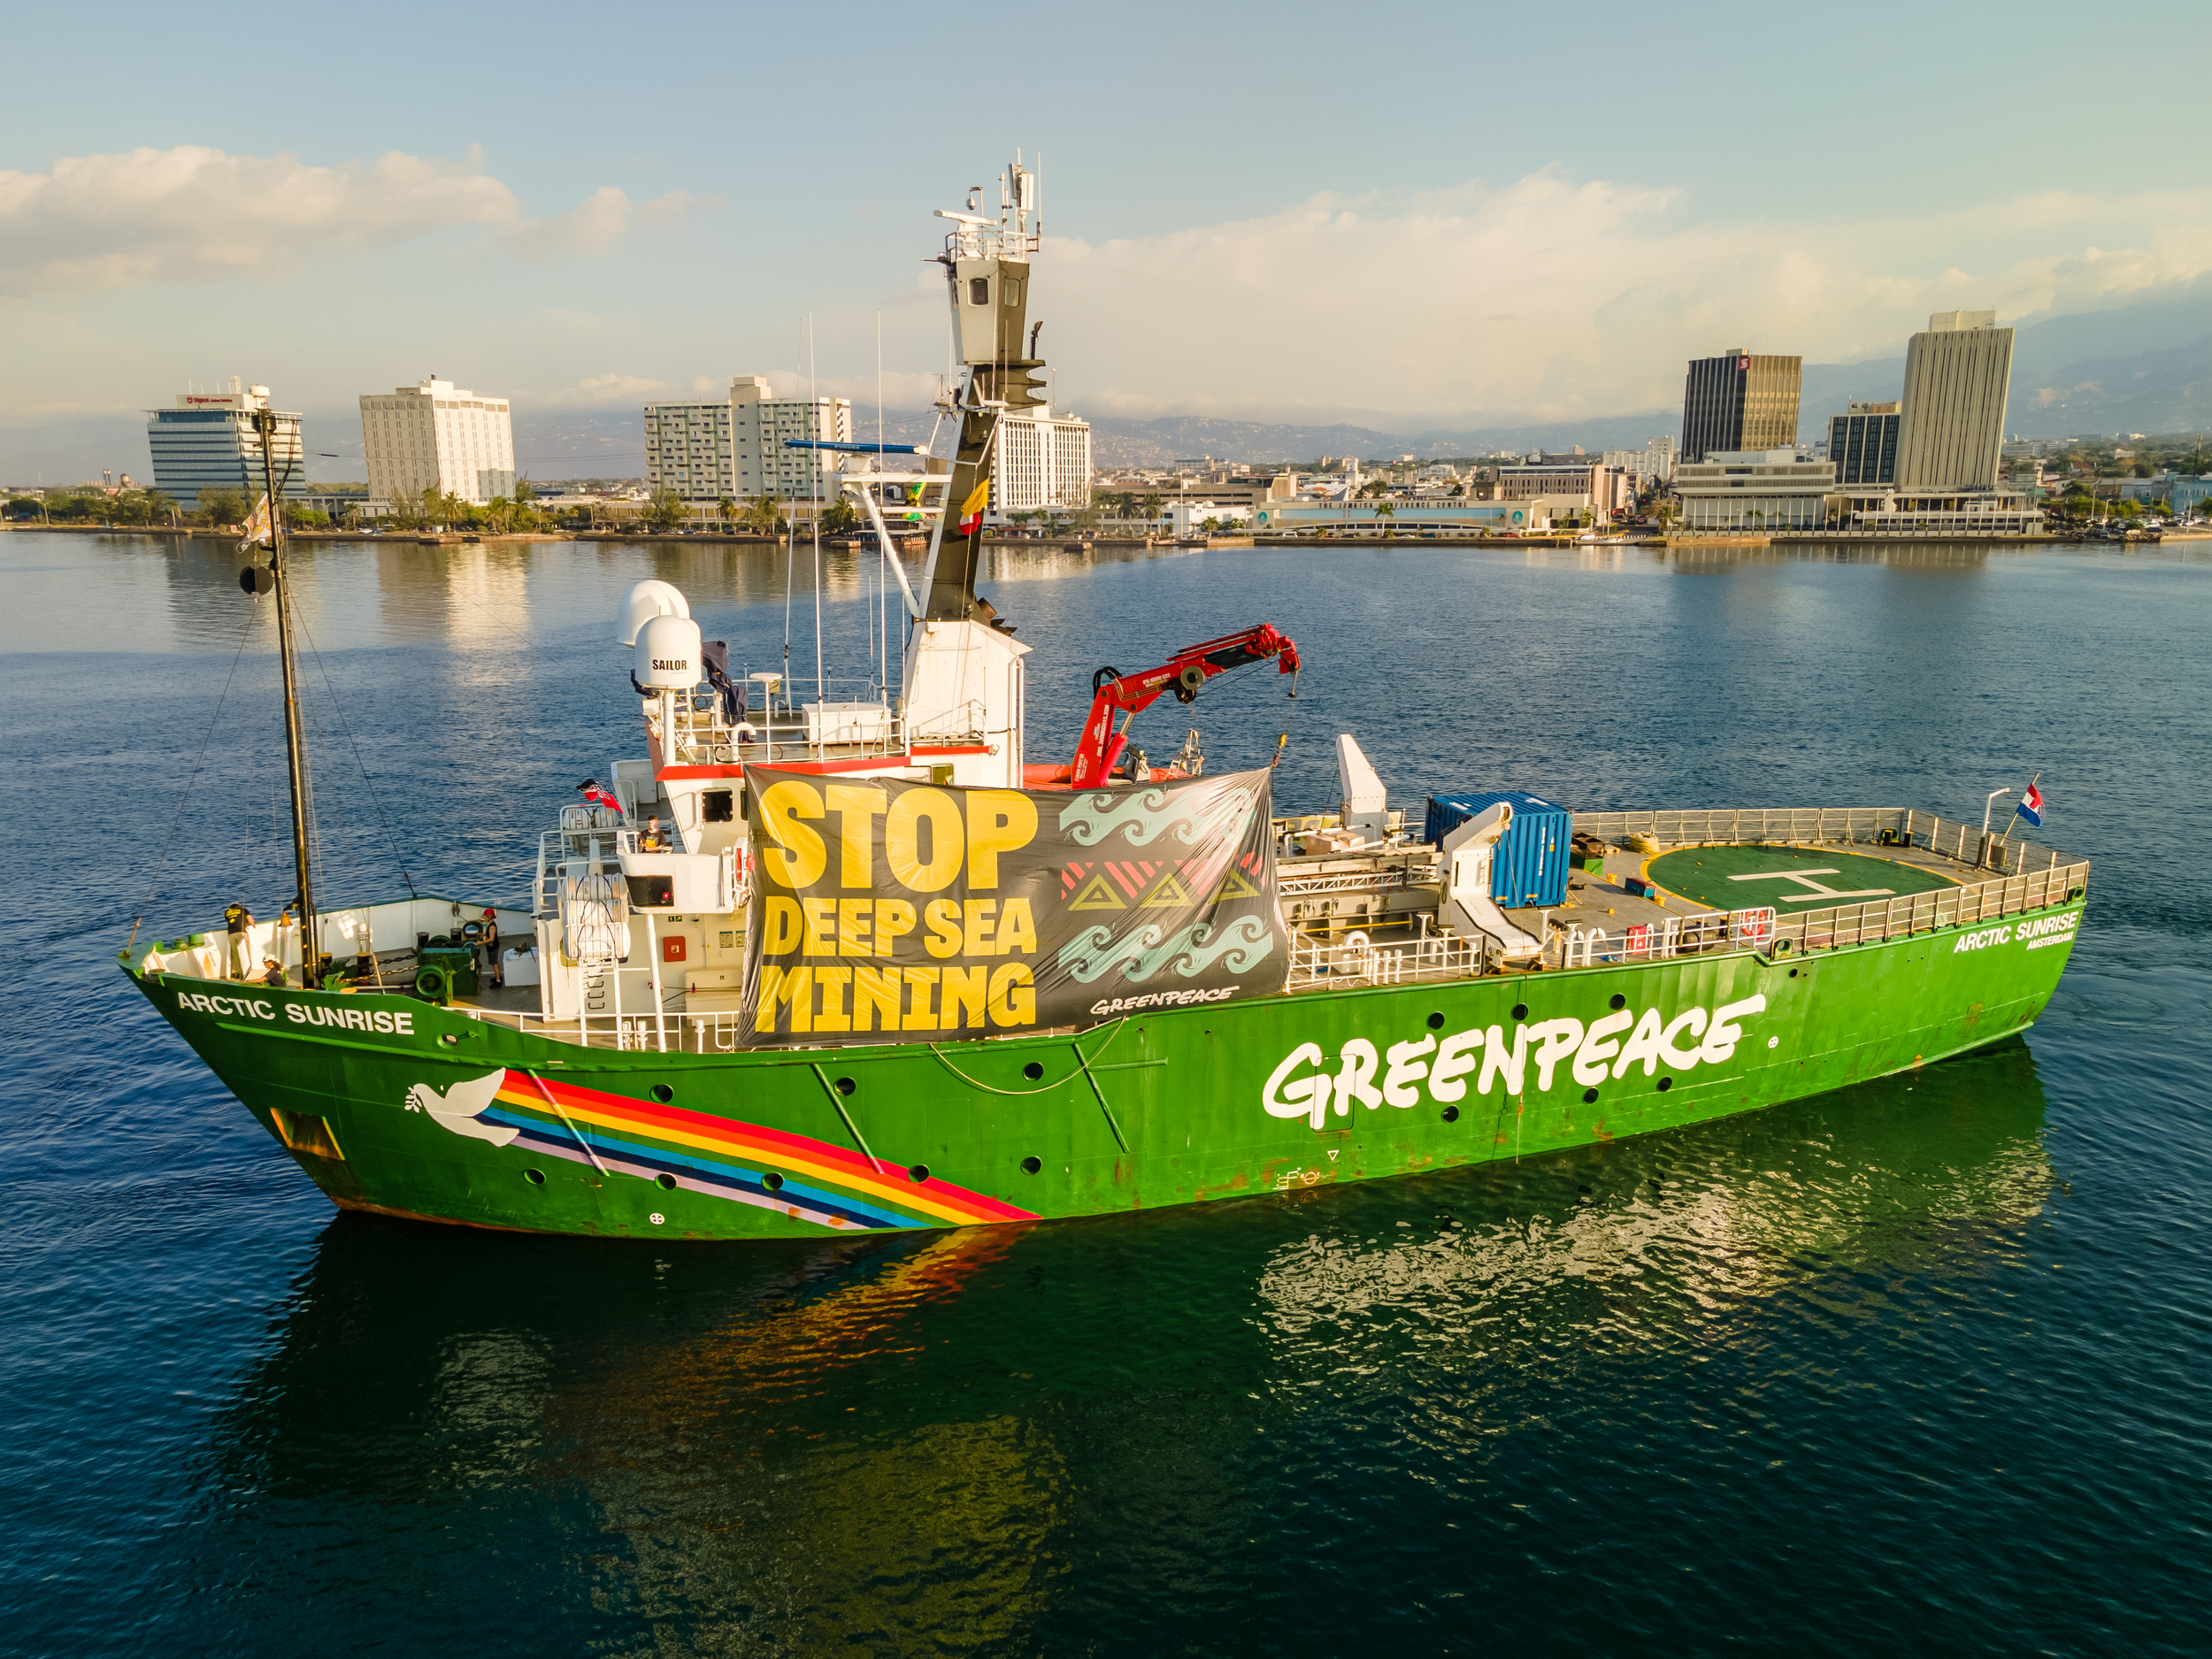 A bright green Greenpeace ship with a rainbow dove motif across the stern, sat in a still bay, with a banner hanging reading "Stop Deep Sea Mining" and a few high rise buildings in the background